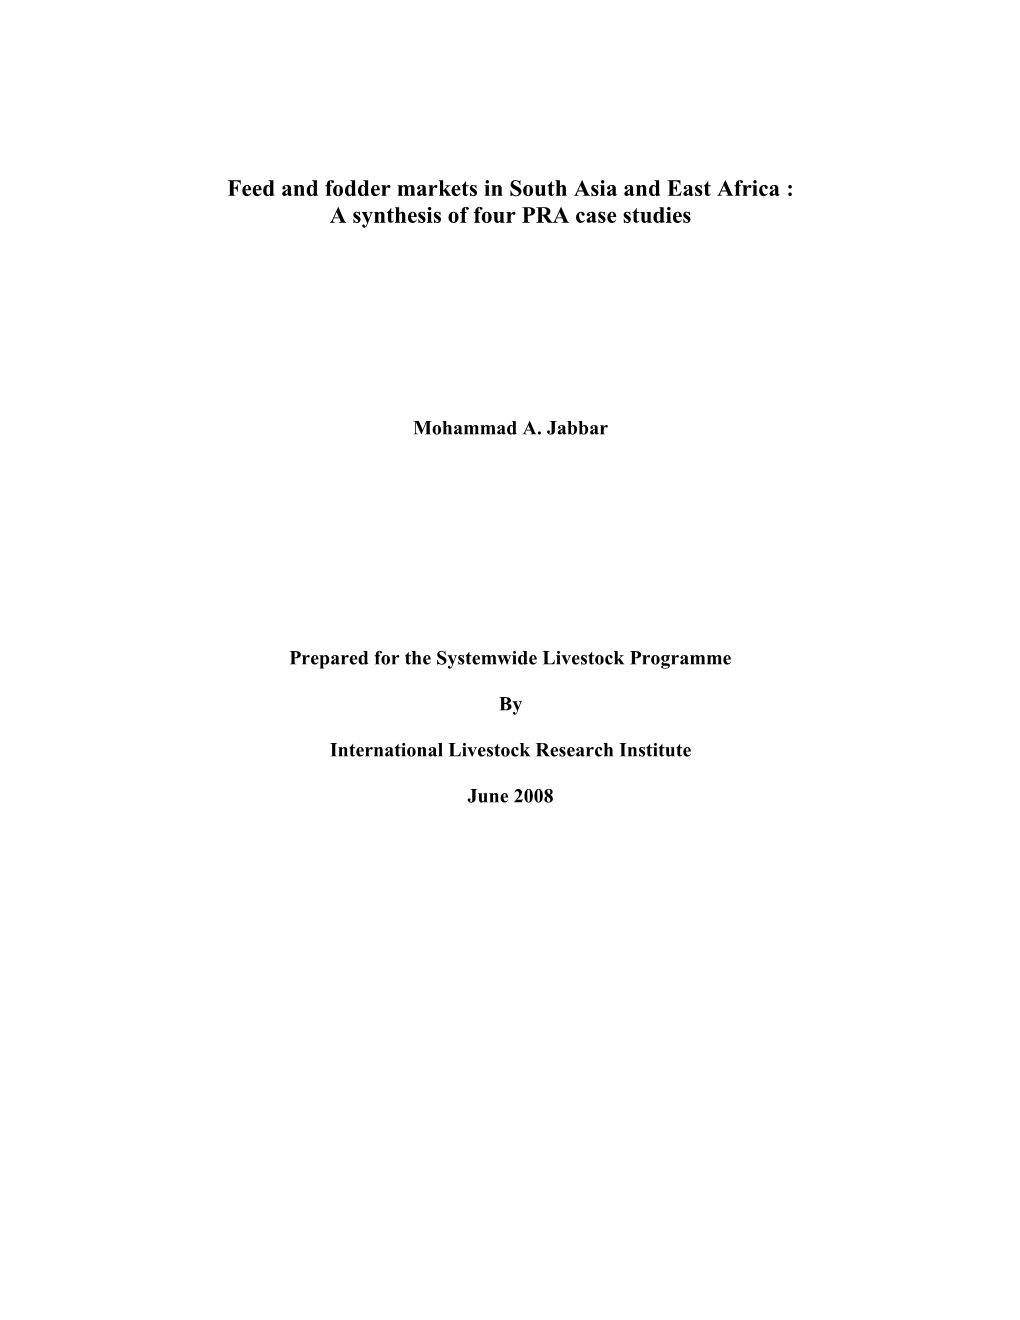 Feed and Fodder Markets in South Asia and East Africa : a Synthesis of Four PRA Case Studies